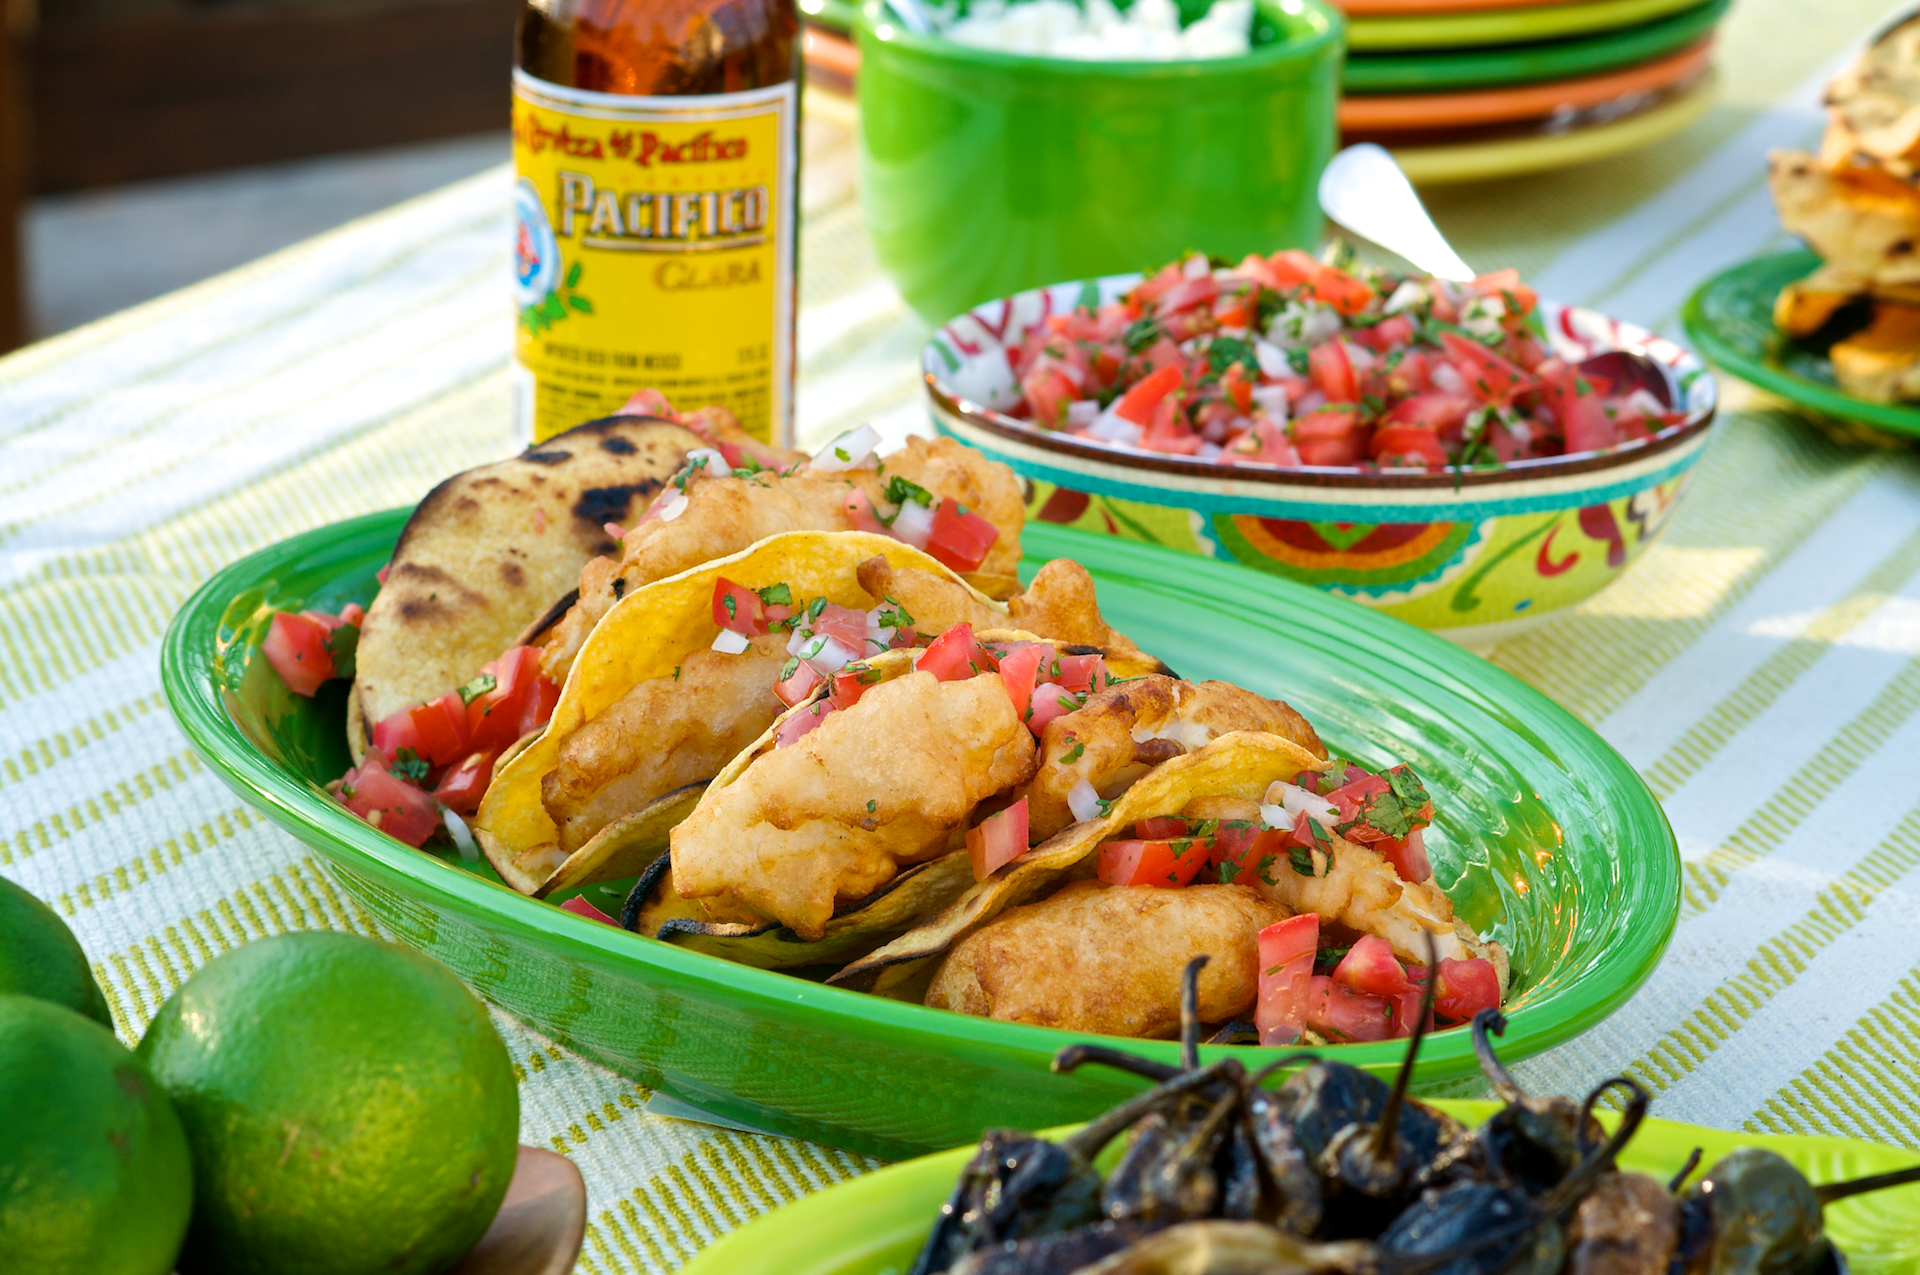 The fish taco craze has spread from Mexico to California, to the rest of the USA. It’s a delightful dish to serve at your next gathering. This beer-battered version is always a huge hit!